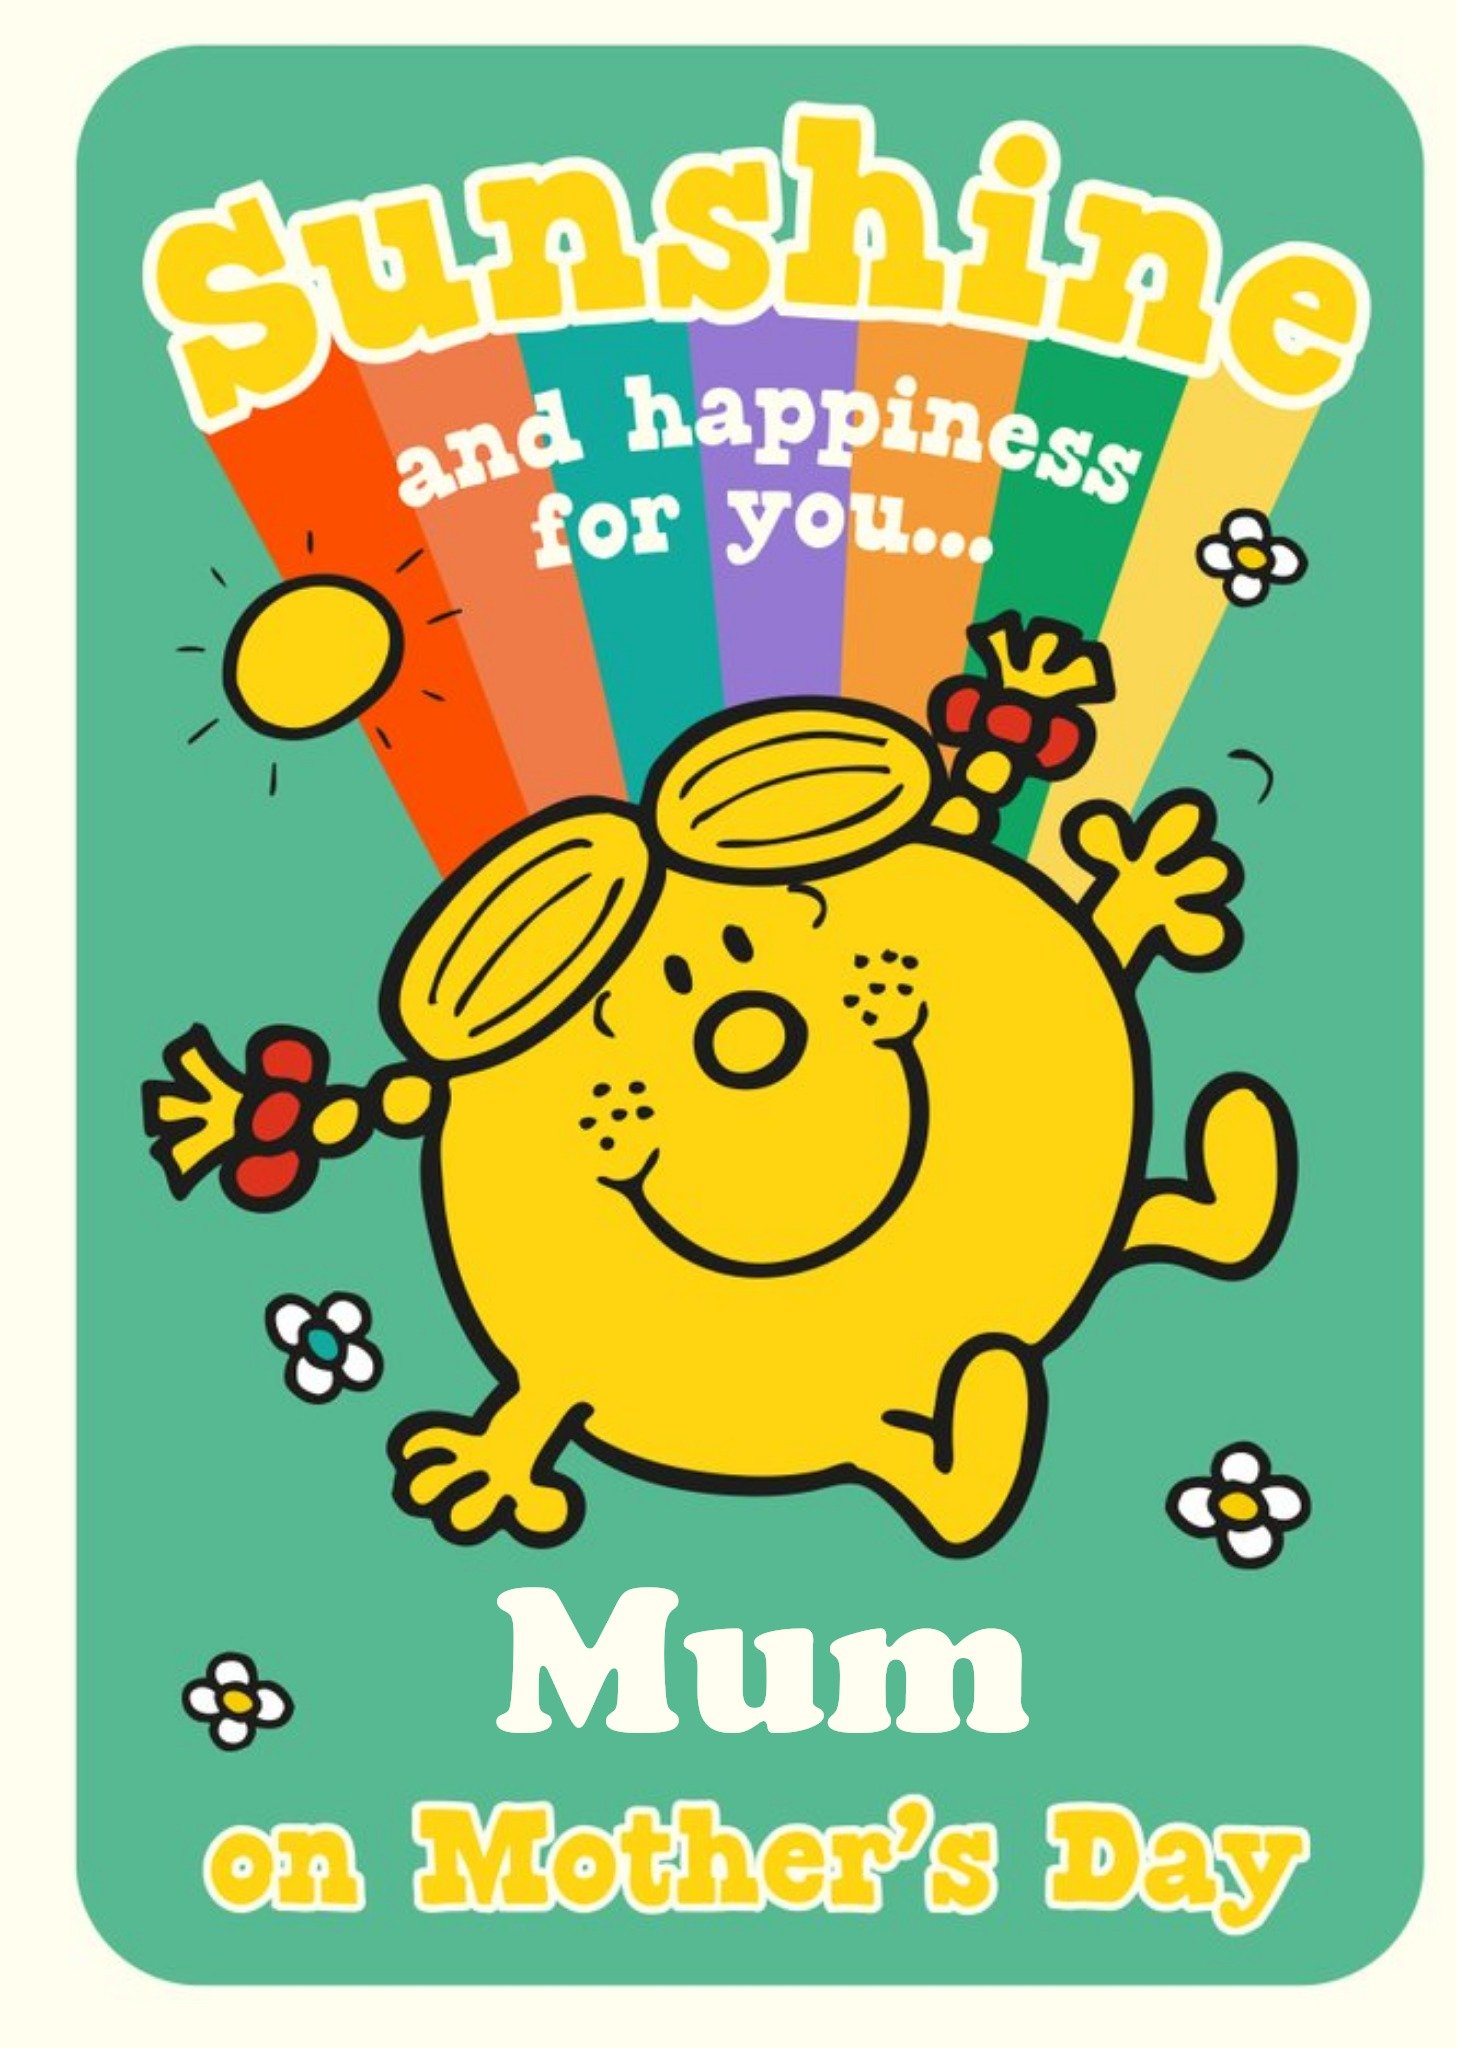 Moonpig Little Miss Sunshine Mr Men Sunshine And Happiness To You Mum On Mothers Day Card, Large